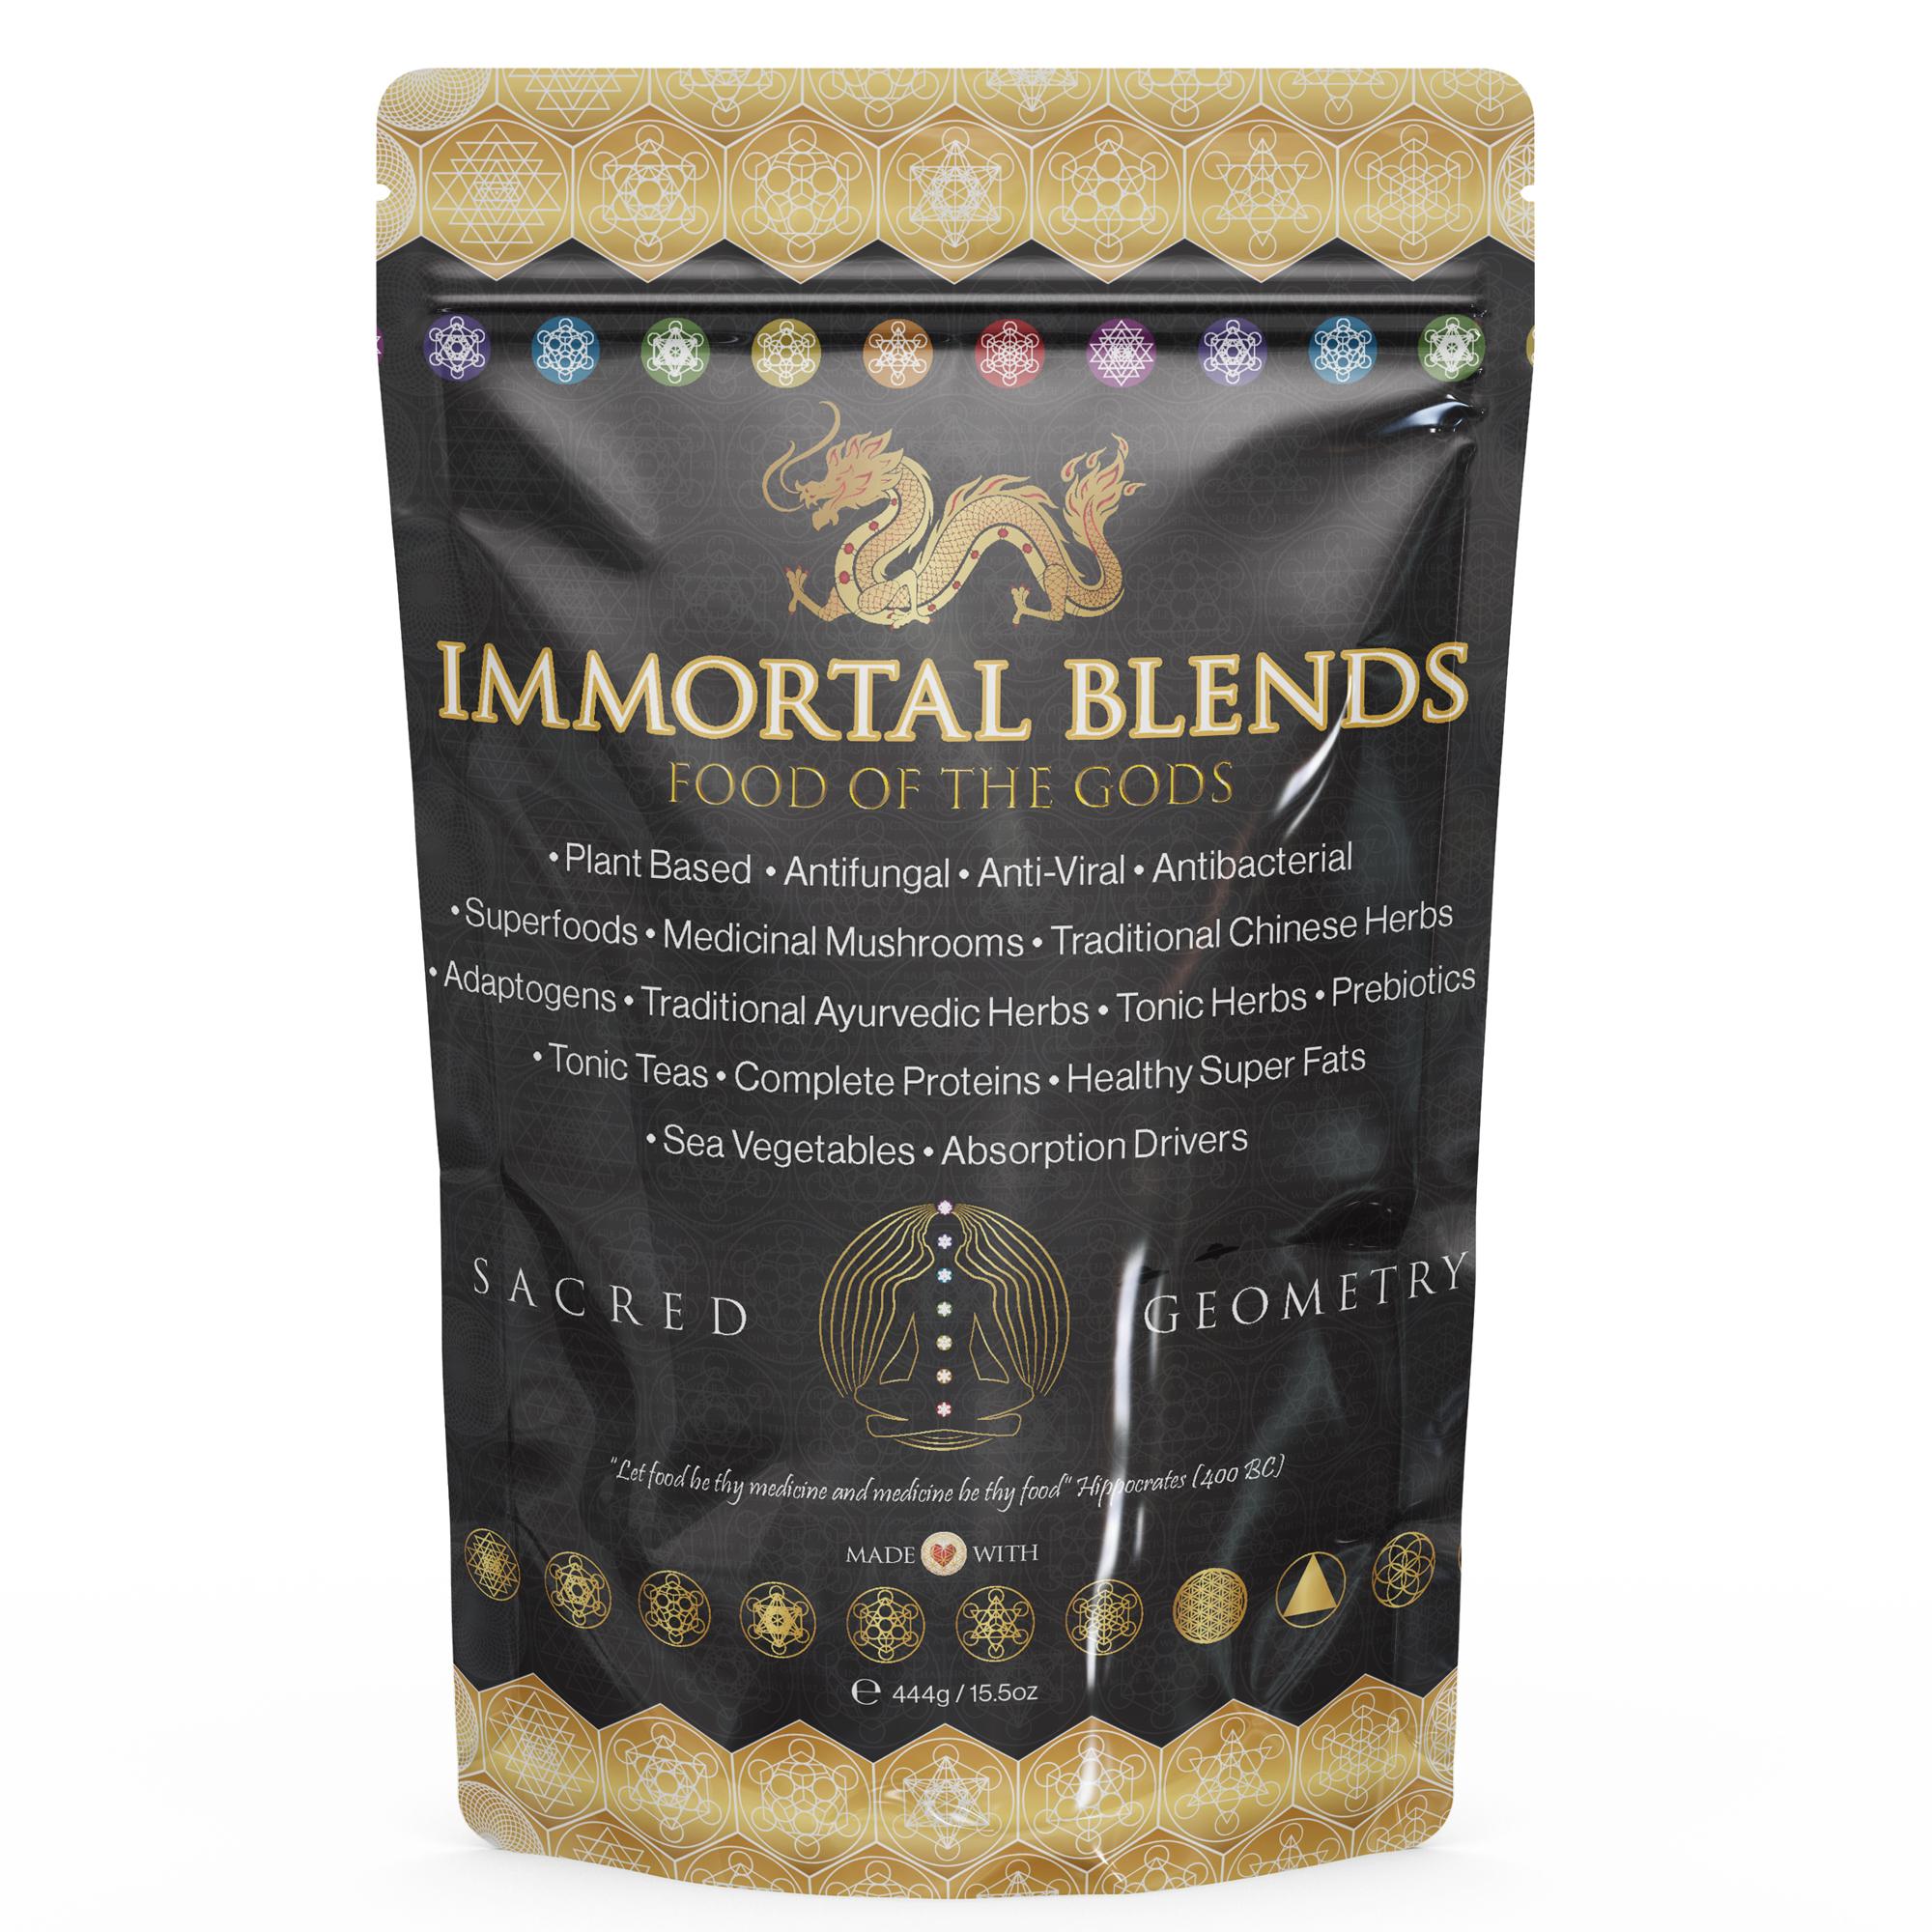 444g Packet of Food of the Gods signature blend, listing ingredients and benefits including plant-based, antifungal, antibacterial, superfoods, medicinal mushrooms, traditional chinese herbs, adaptogens, ayurvedic herbs, tonic herbs, prebiotics, tonic teas, complete proteins, healthy super fats, sea vegetables, absorption drivers.